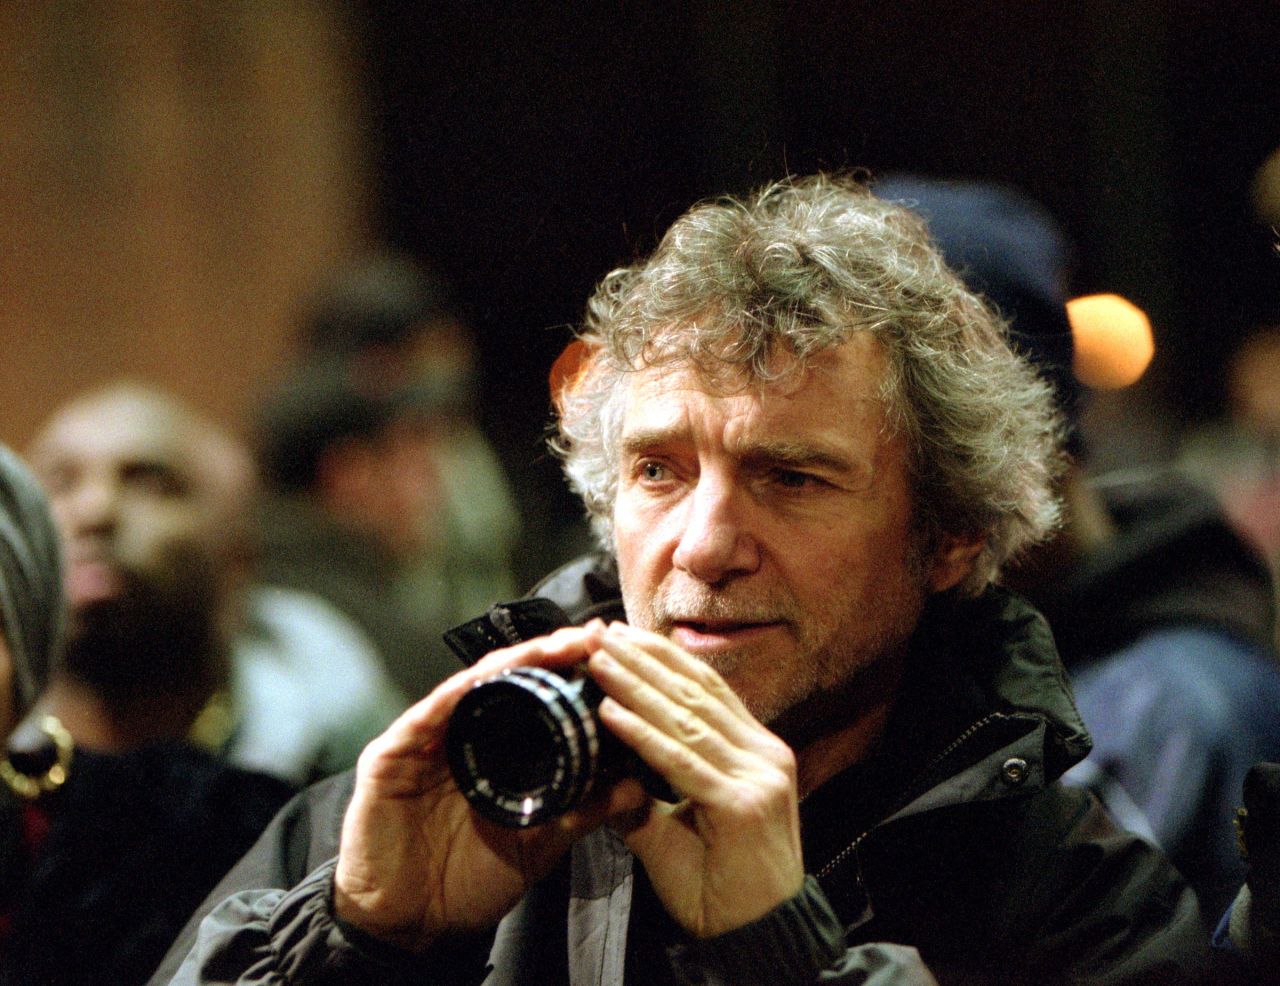 "L.A. Confidential" director and writer <a href="http://www.cnn.com/2016/09/21/entertainment/curtis-hanson-death/" target="_blank">Curtis Hanson</a>, 71, died of natural causes on September 20, Los Angeles police said. He won an Oscar with Brian Helgeland for the screenplay on "L.A. Confidential," and he also directed "8 Mile" and "Wonder Boys."